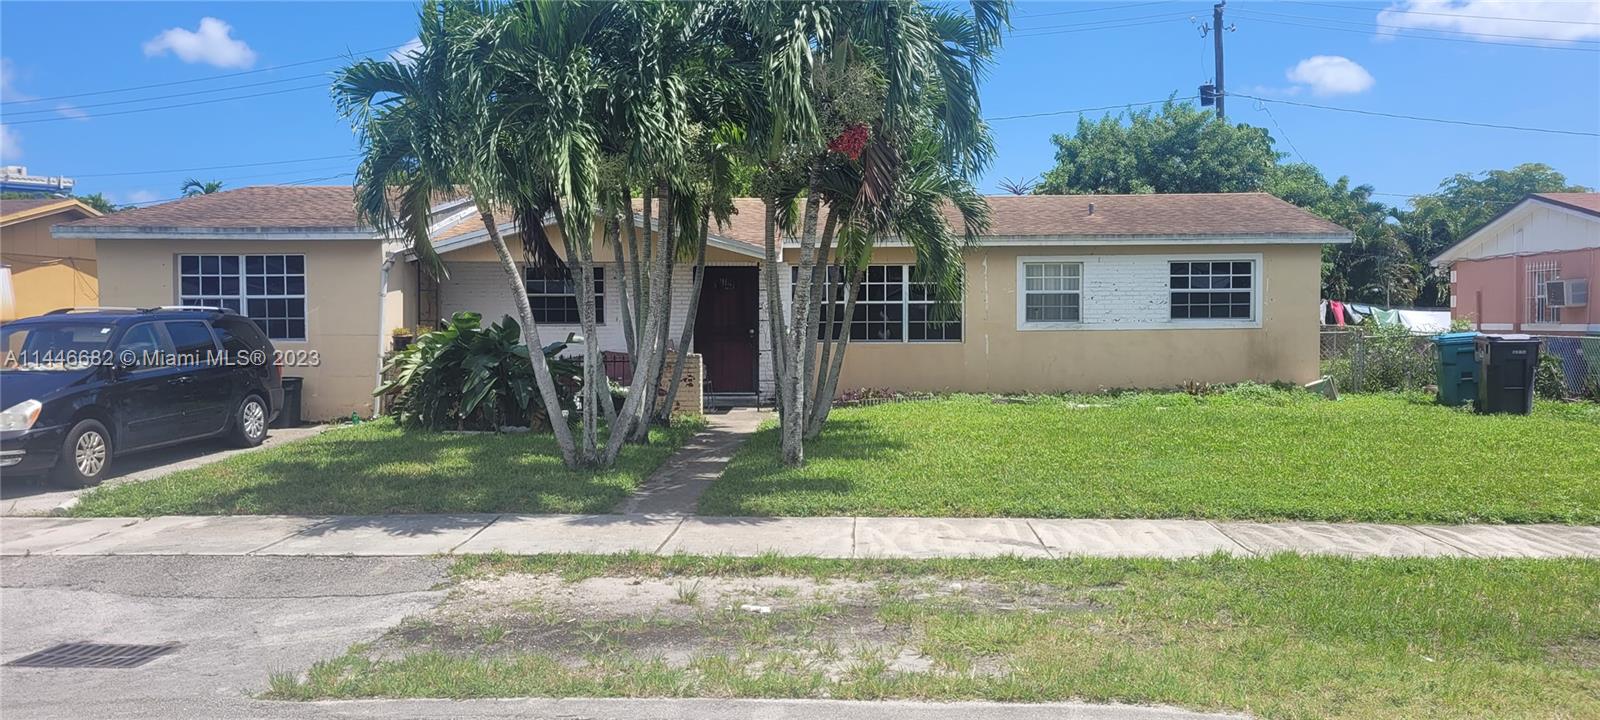 Photo 1 of 21221 NW 27th Ct in Miami Gardens - MLS A11446682